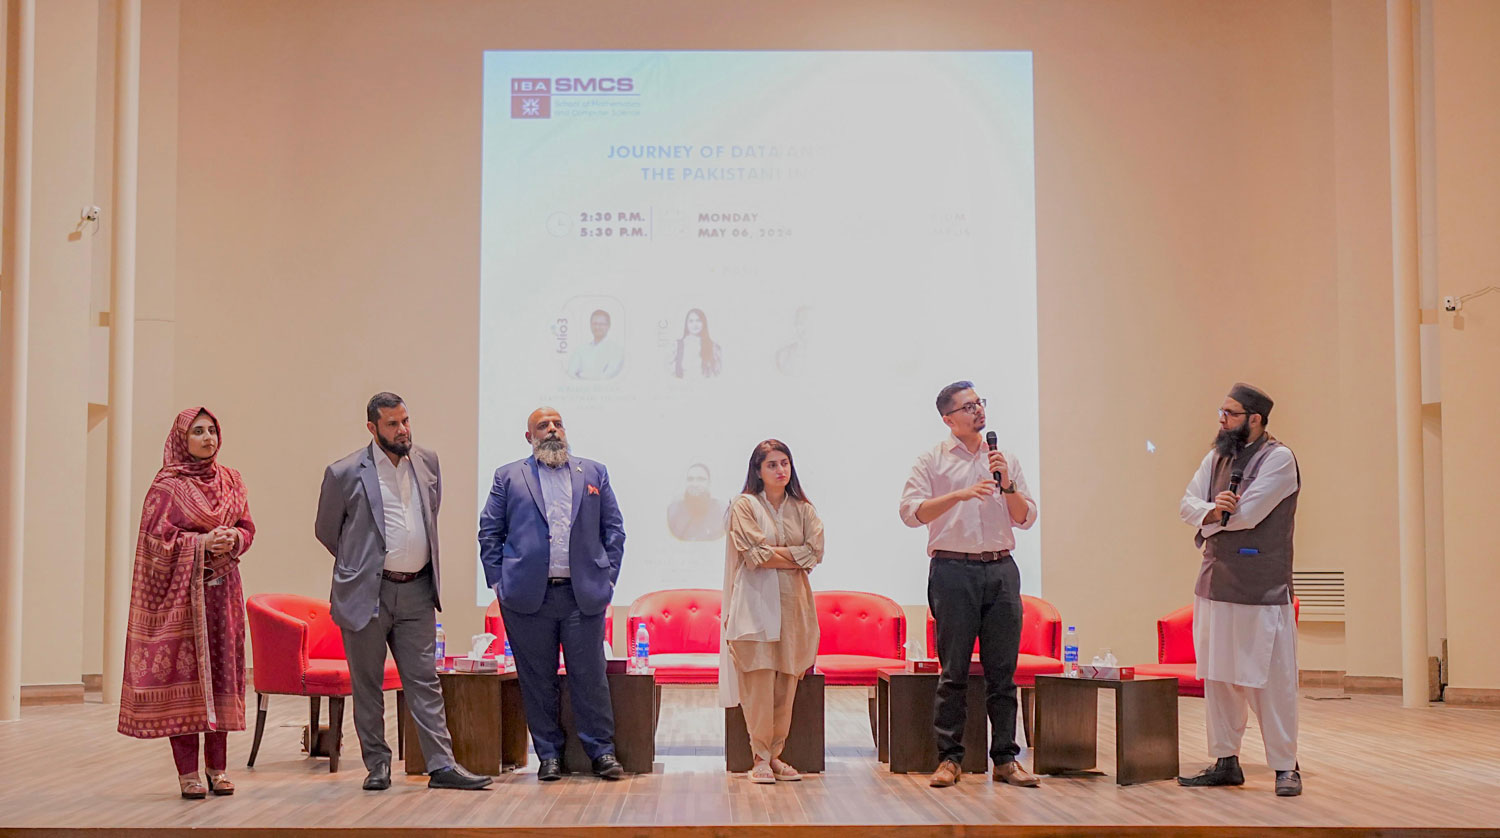 SMCS hosts a panel discussion on  ‘The insightful Journey of Data Analytics in Pakistani Industry’